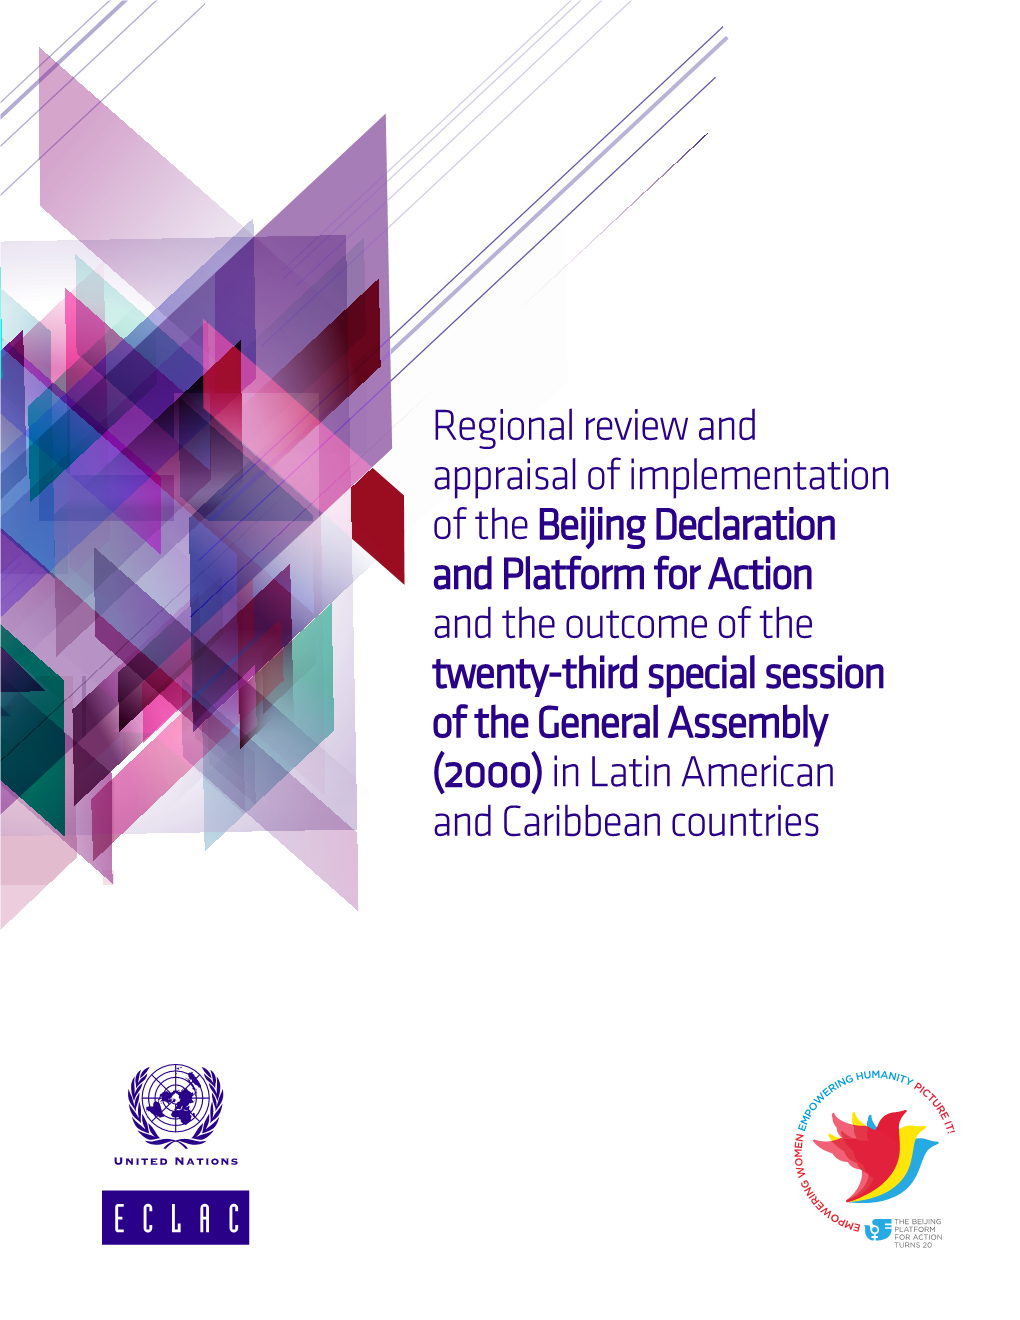 Regional Review and Appraisal of Implementation of the Beijing